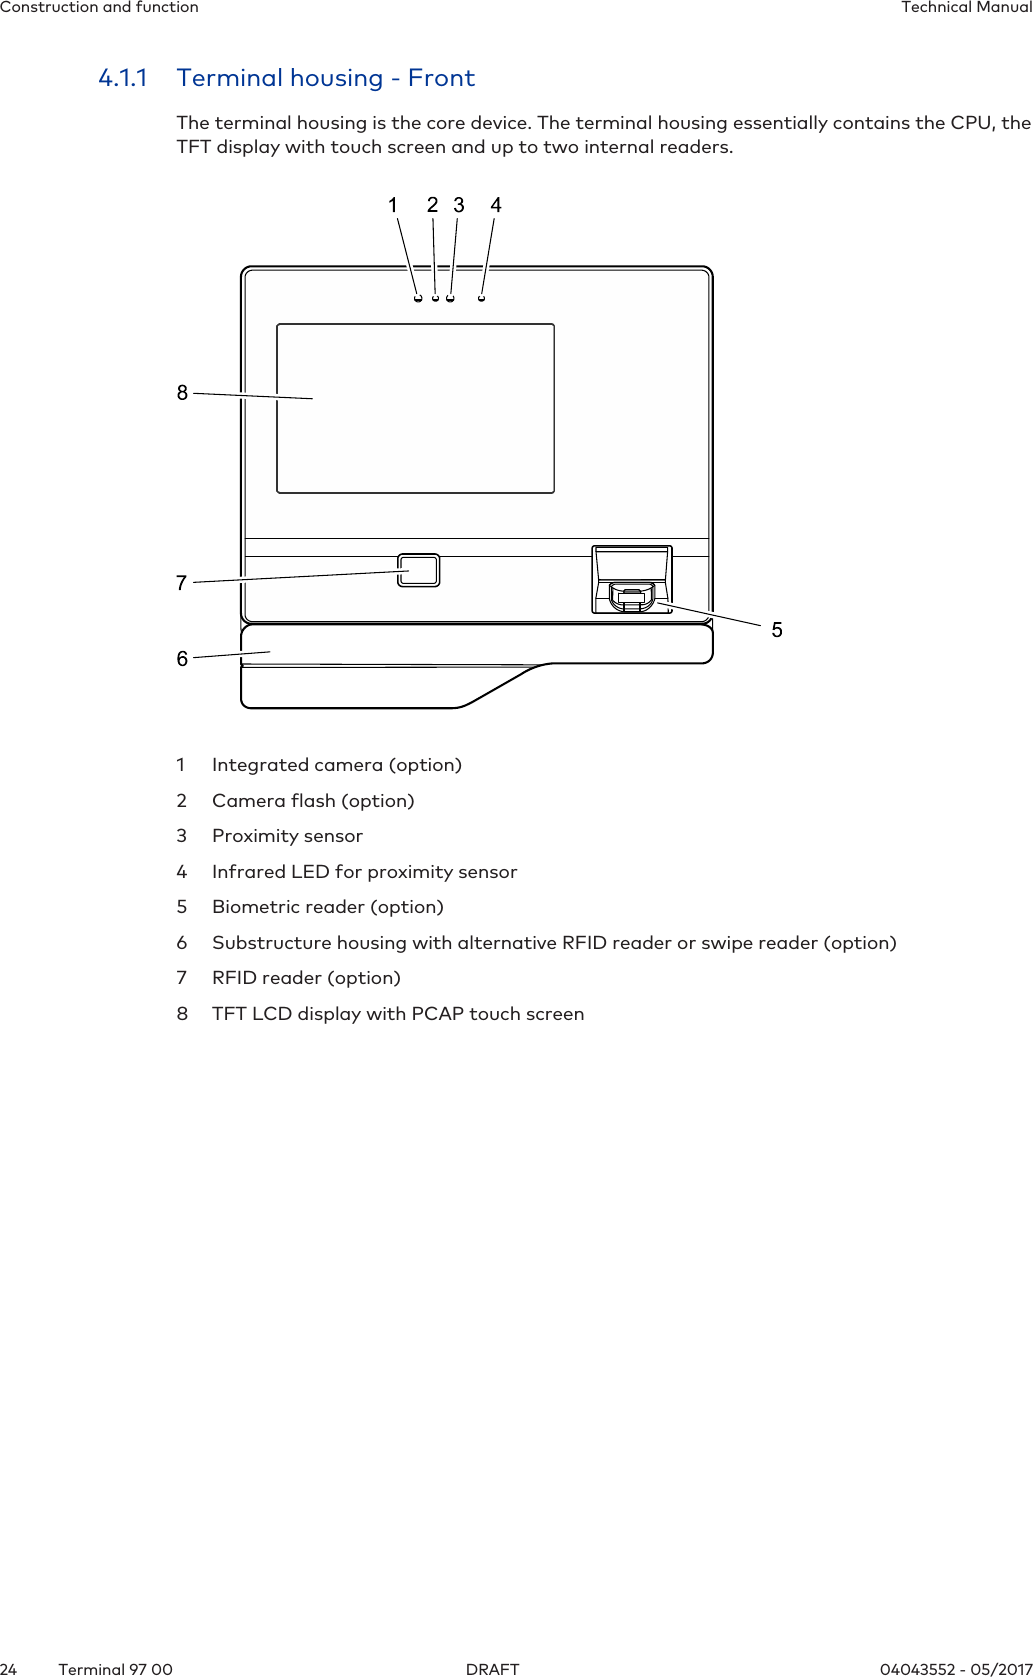 Construction and function Technical Manual24 04043552 - 05/2017Terminal 97 00 DRAFT4.1.1 Terminal housing - FrontThe terminal housing is the core device. The terminal housing essentially contains the CPU, theTFT display with touch screen and up to two internal readers.1 Integrated camera (option)2 Camera flash (option)3 Proximity sensor4 Infrared LED for proximity sensor5 Biometric reader (option)6 Substructure housing with alternative RFID reader or swipe reader (option)7 RFID reader (option)8 TFT LCD display with PCAP touch screen